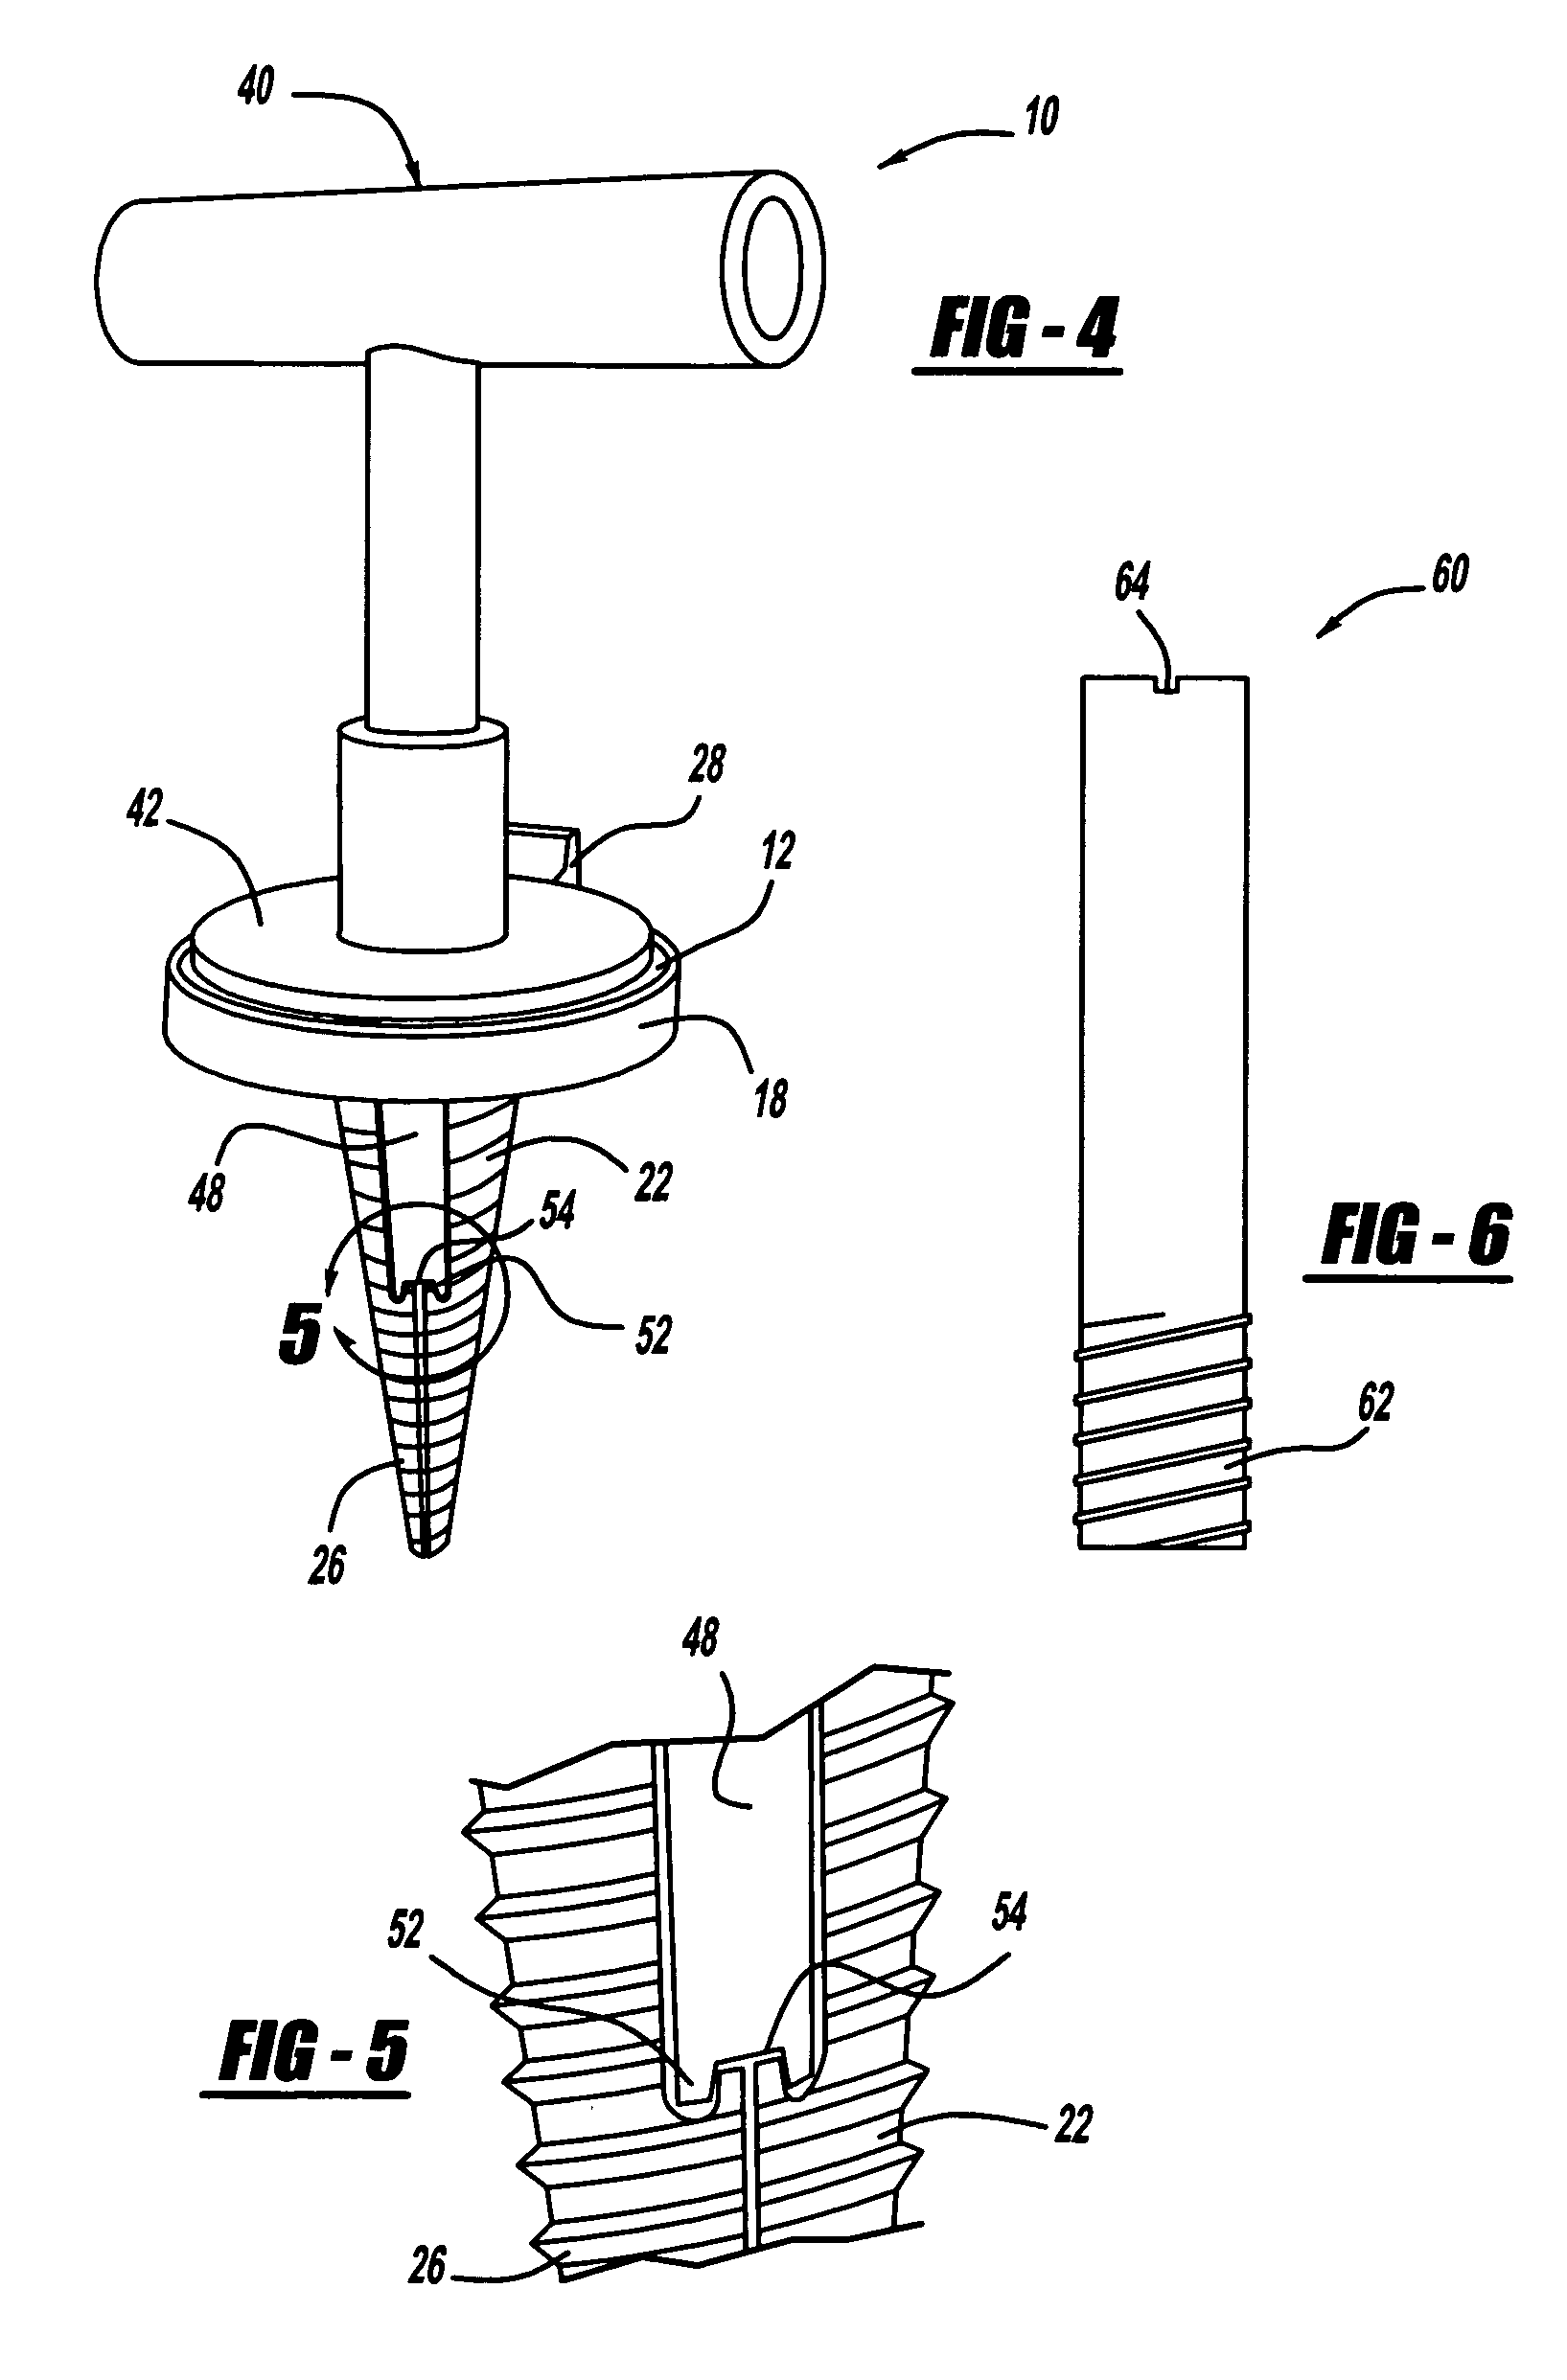 Minimally invasive surgical access device